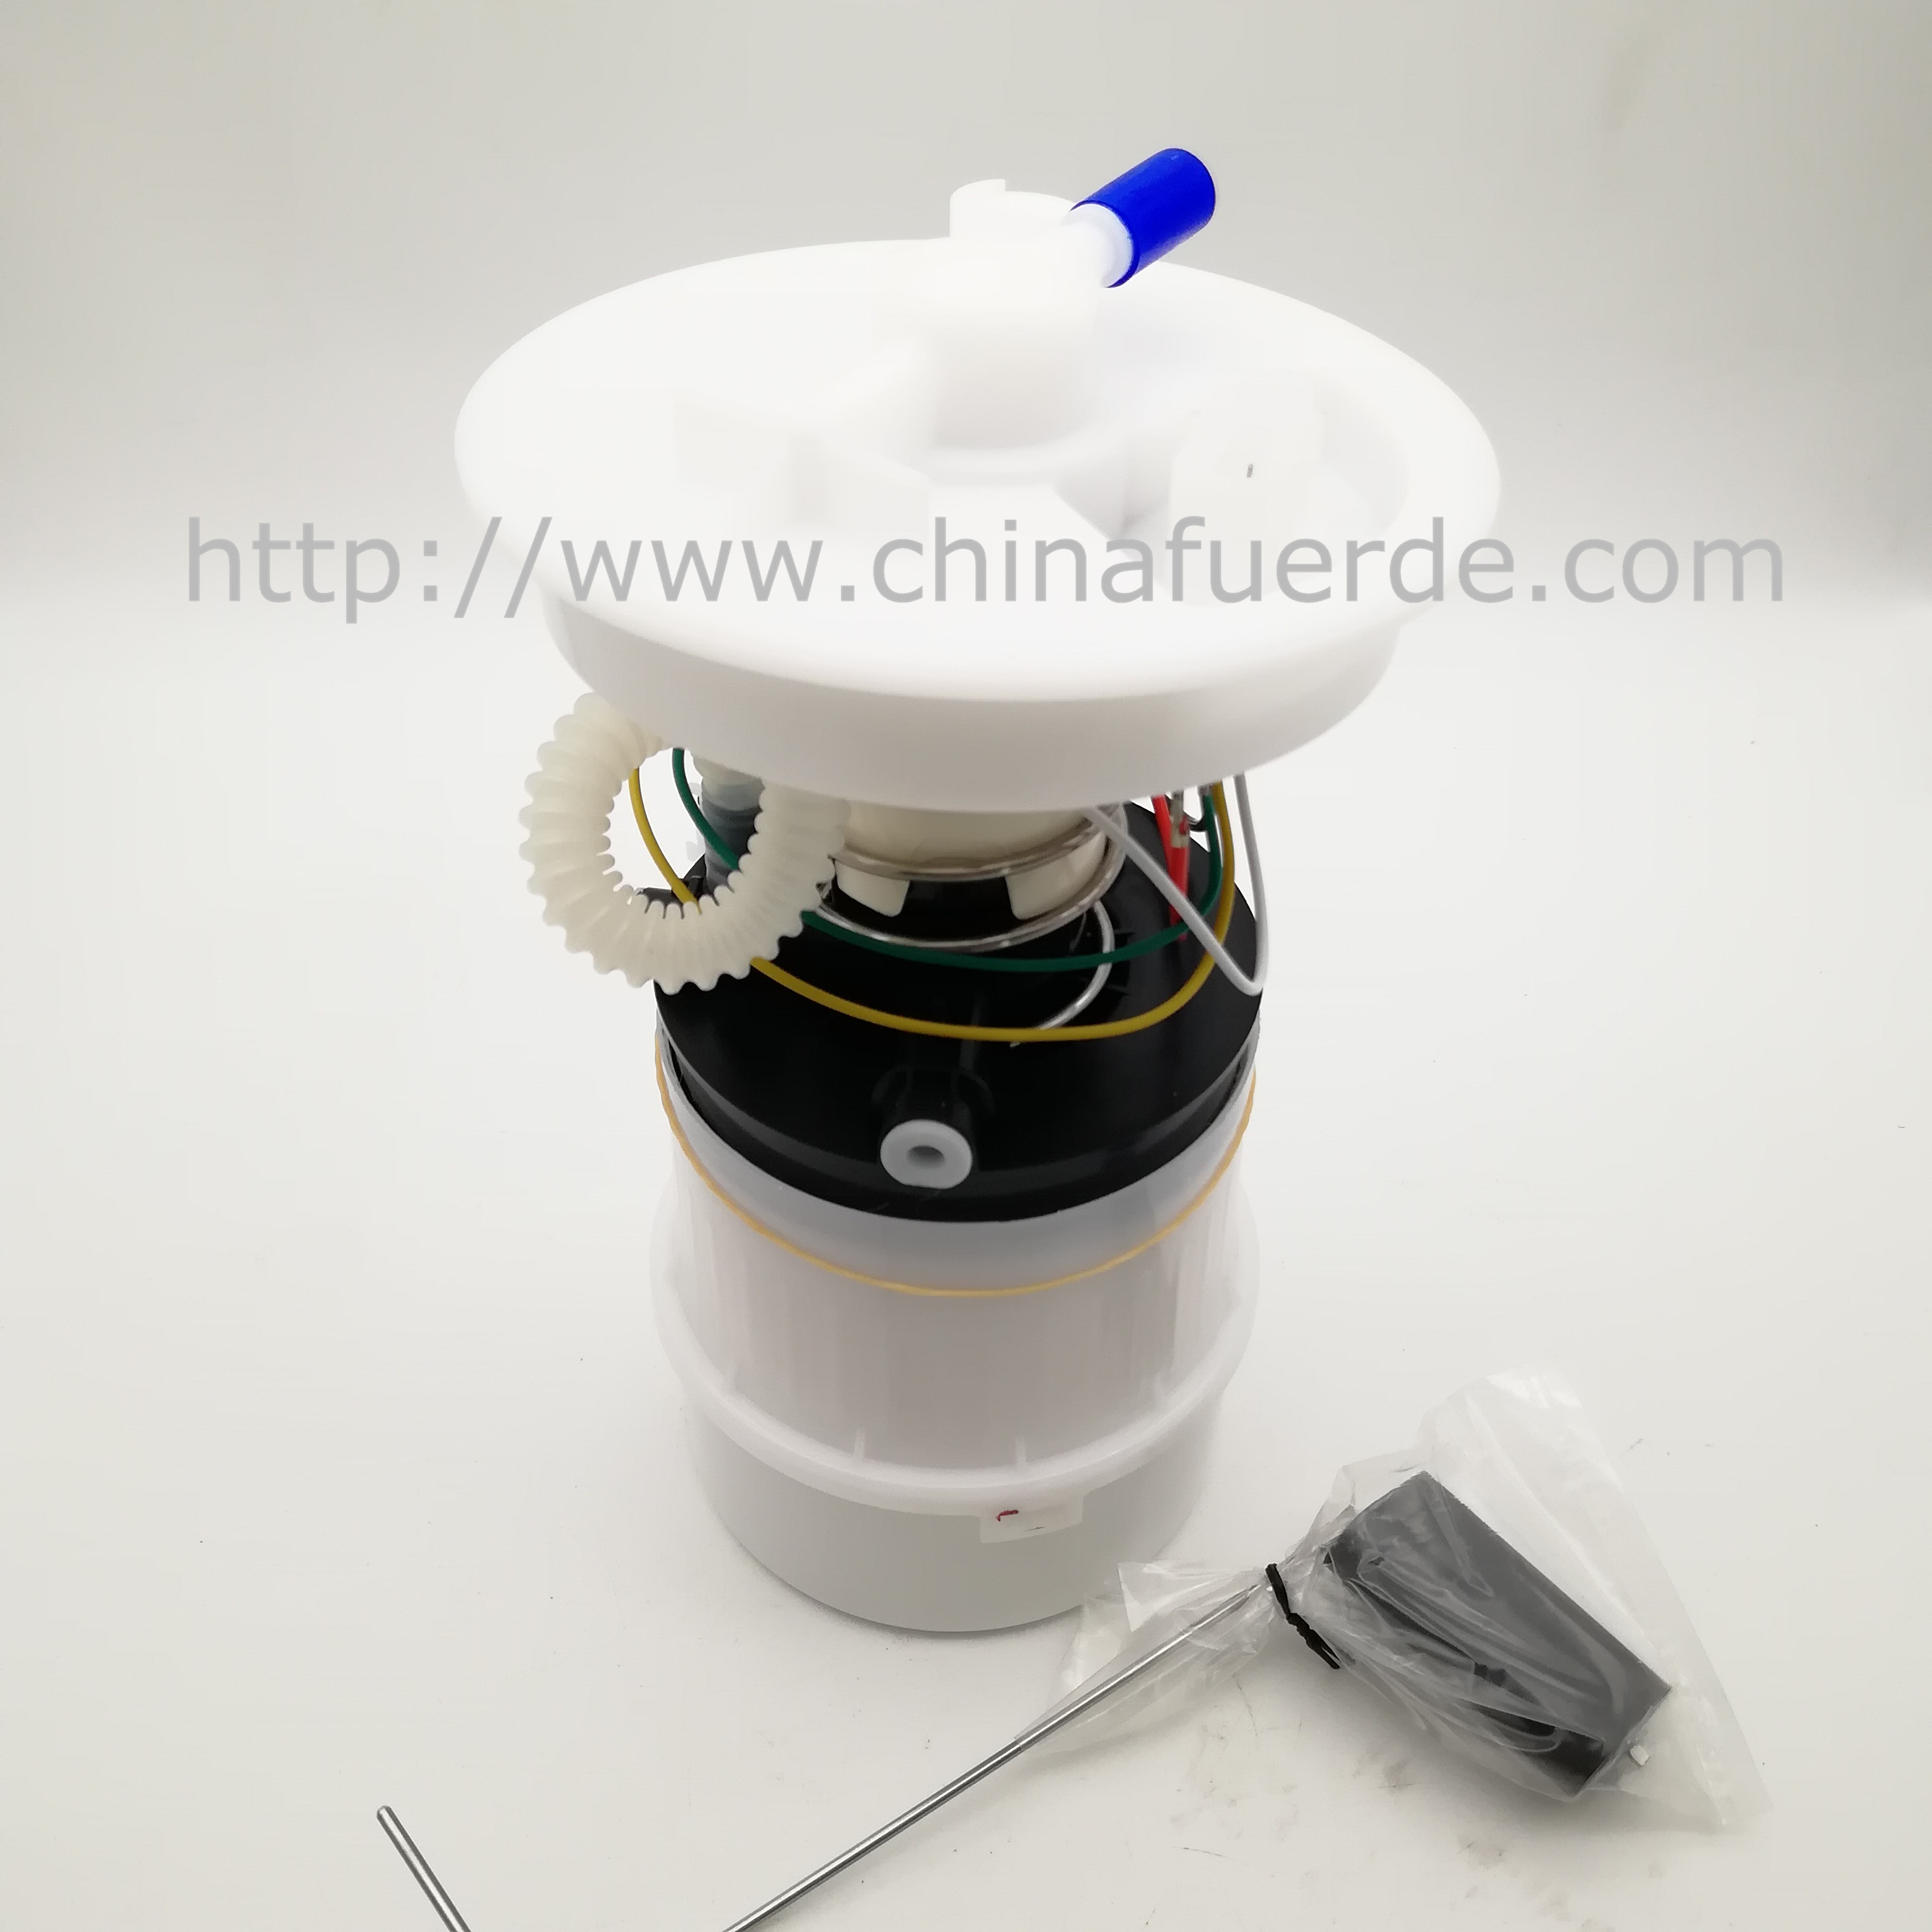 FUEL PUMP ASSEMBLY DL34-9H307-GB/ZY08-13-35XH MAZDA 3 FORD C-MAX FOCUS